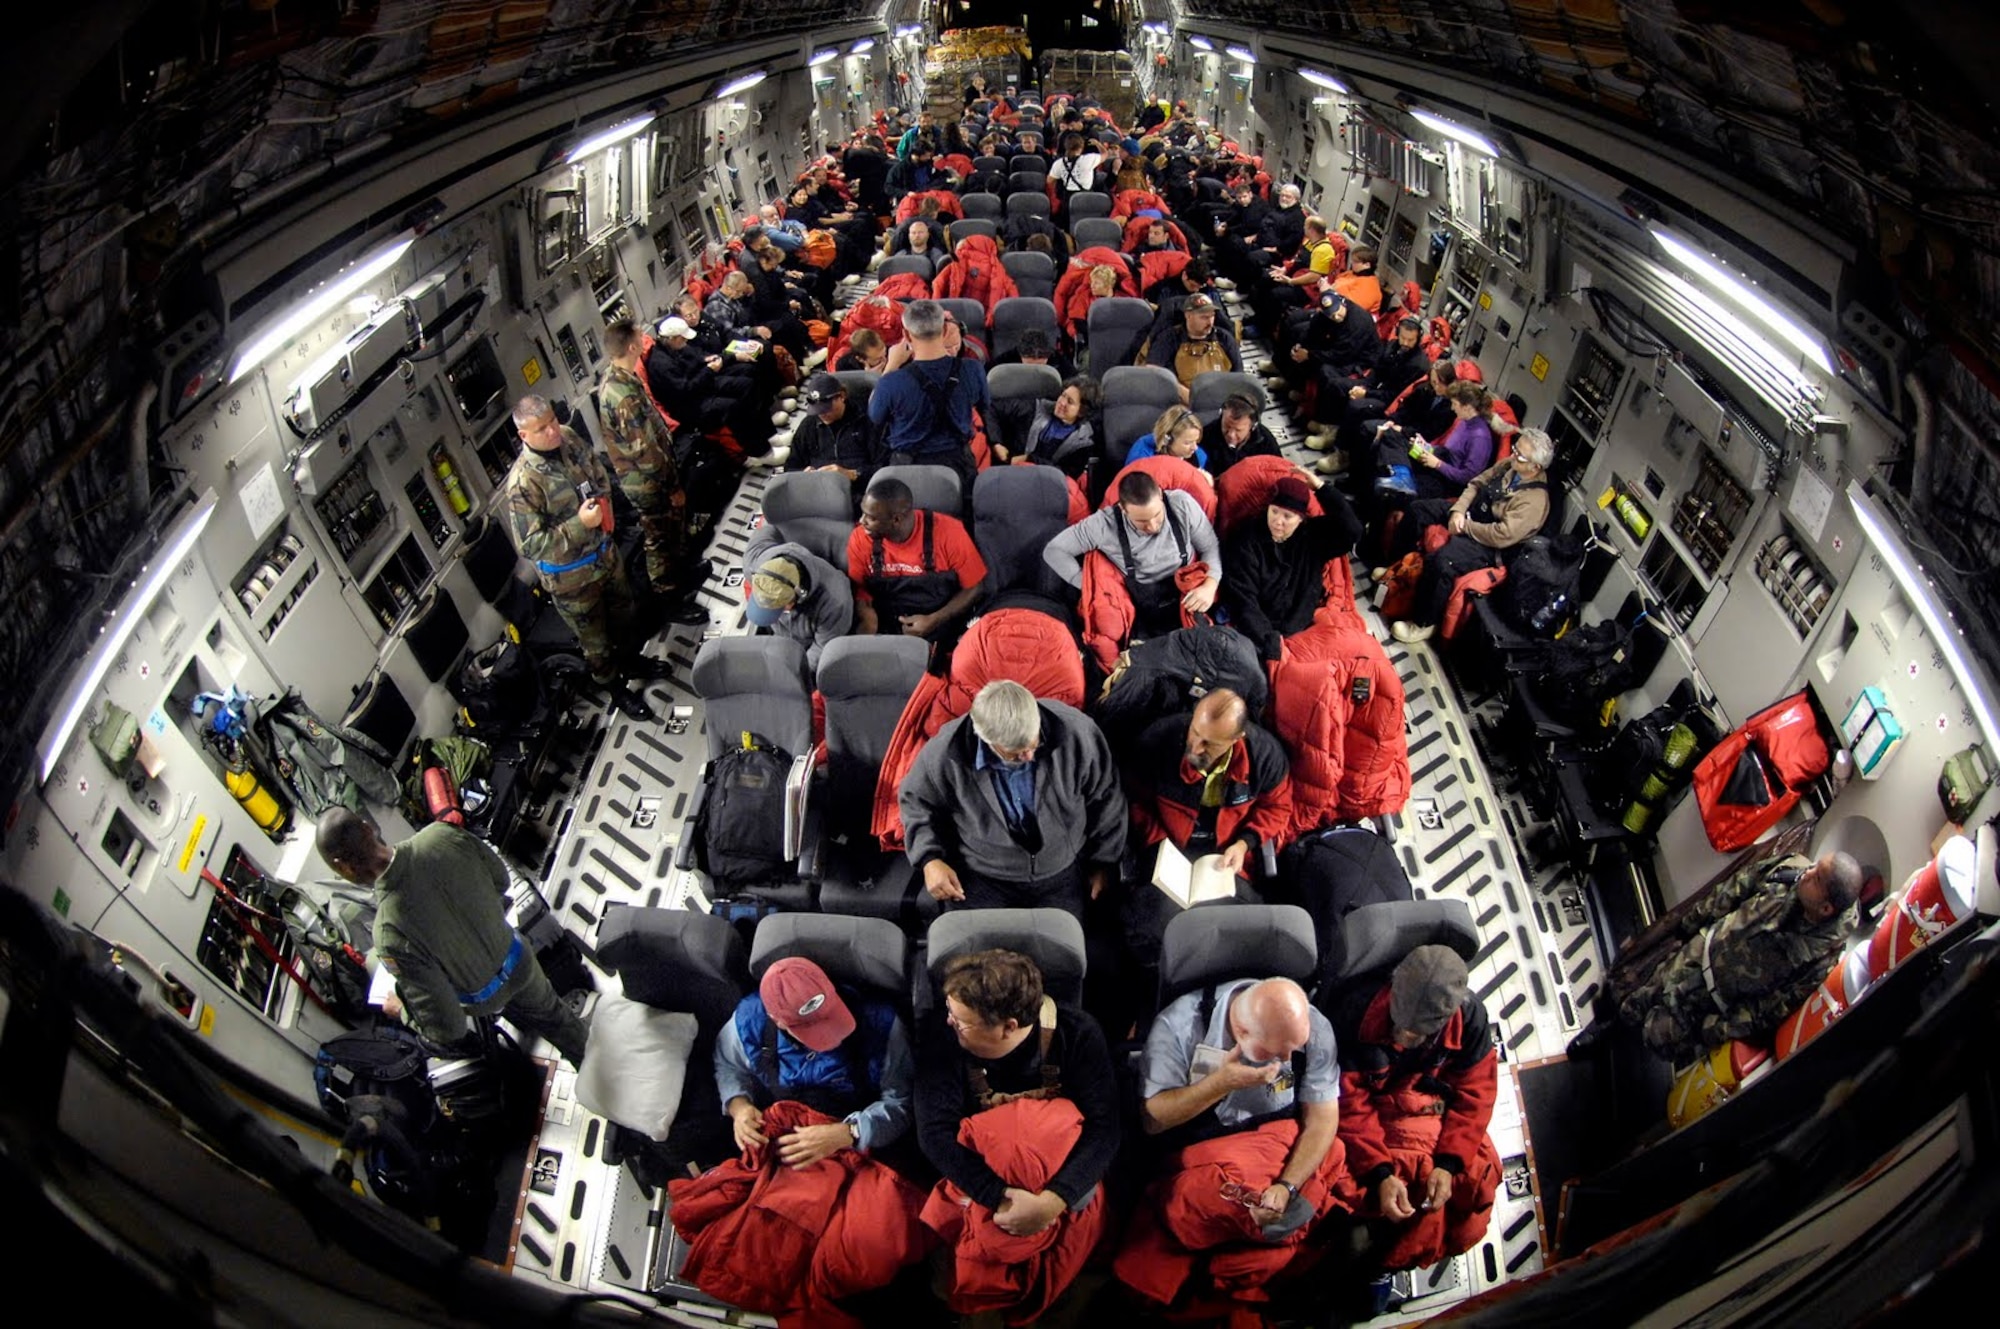 Personnel from the National Science Foundation travel via a U.S. Air Force C-17 Globemaster III en route to McMurdo Station, Antarctica, on October 28, 2010. The U.S. Air Force, Navy, Army, and Coast Guard are lending operational and logistical support to the NSF's research and exploration efforts in Antarctica. This support is provided by the Joint Task Force Support Forces Antarctica, led by 13th Air Force at Joint Base Pearl Harbor-Hickam, Hawaii. JTF SFA coordinates strategic intertheater airlift, tactical deep field support, aeromedical evacuation support, search and rescue response, sealift, seaport access, bulk fuel supply, port cargo handling, and transportation requirements. Operation Deep Freeze is scheduled through Feb. 24, 2011. (courtesy photo)